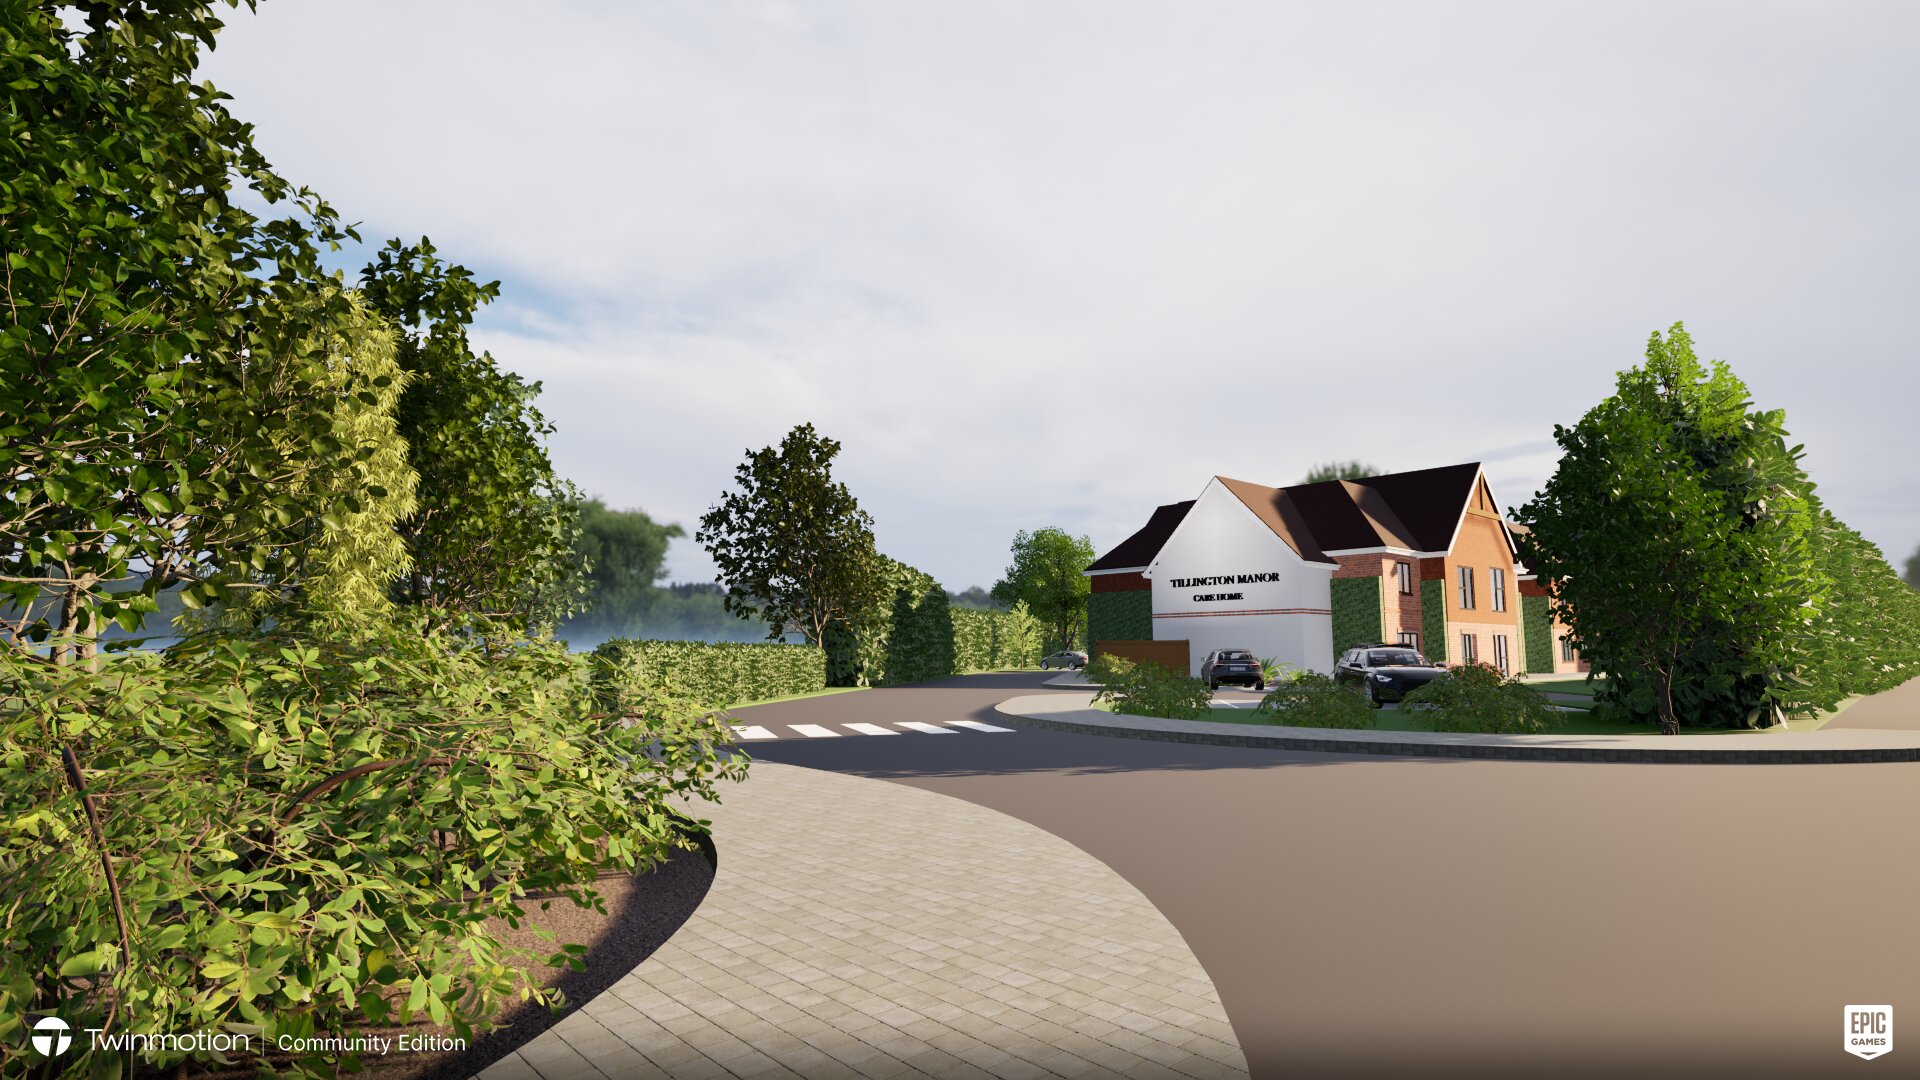 BREAKING NEWS | Outline planning application submitted for a new care home near a popular pub on the outskirts of Hereford